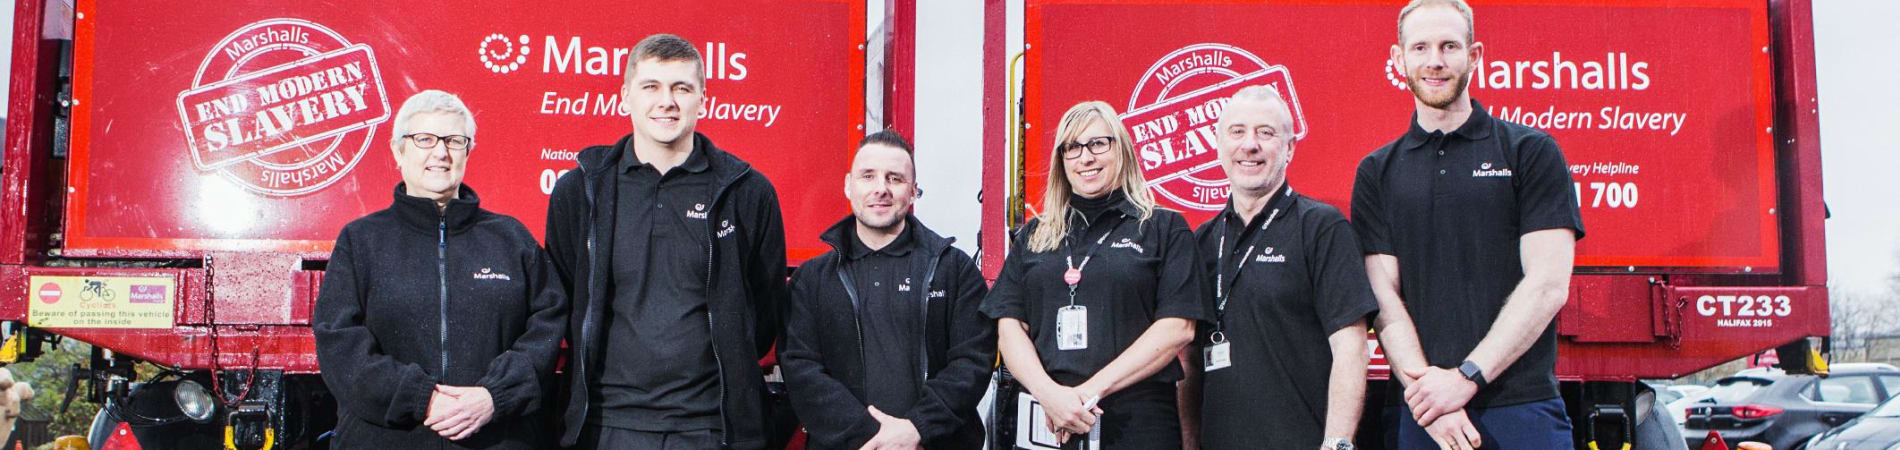 Marshalls Front Line Staff Working to End Modern Slavery